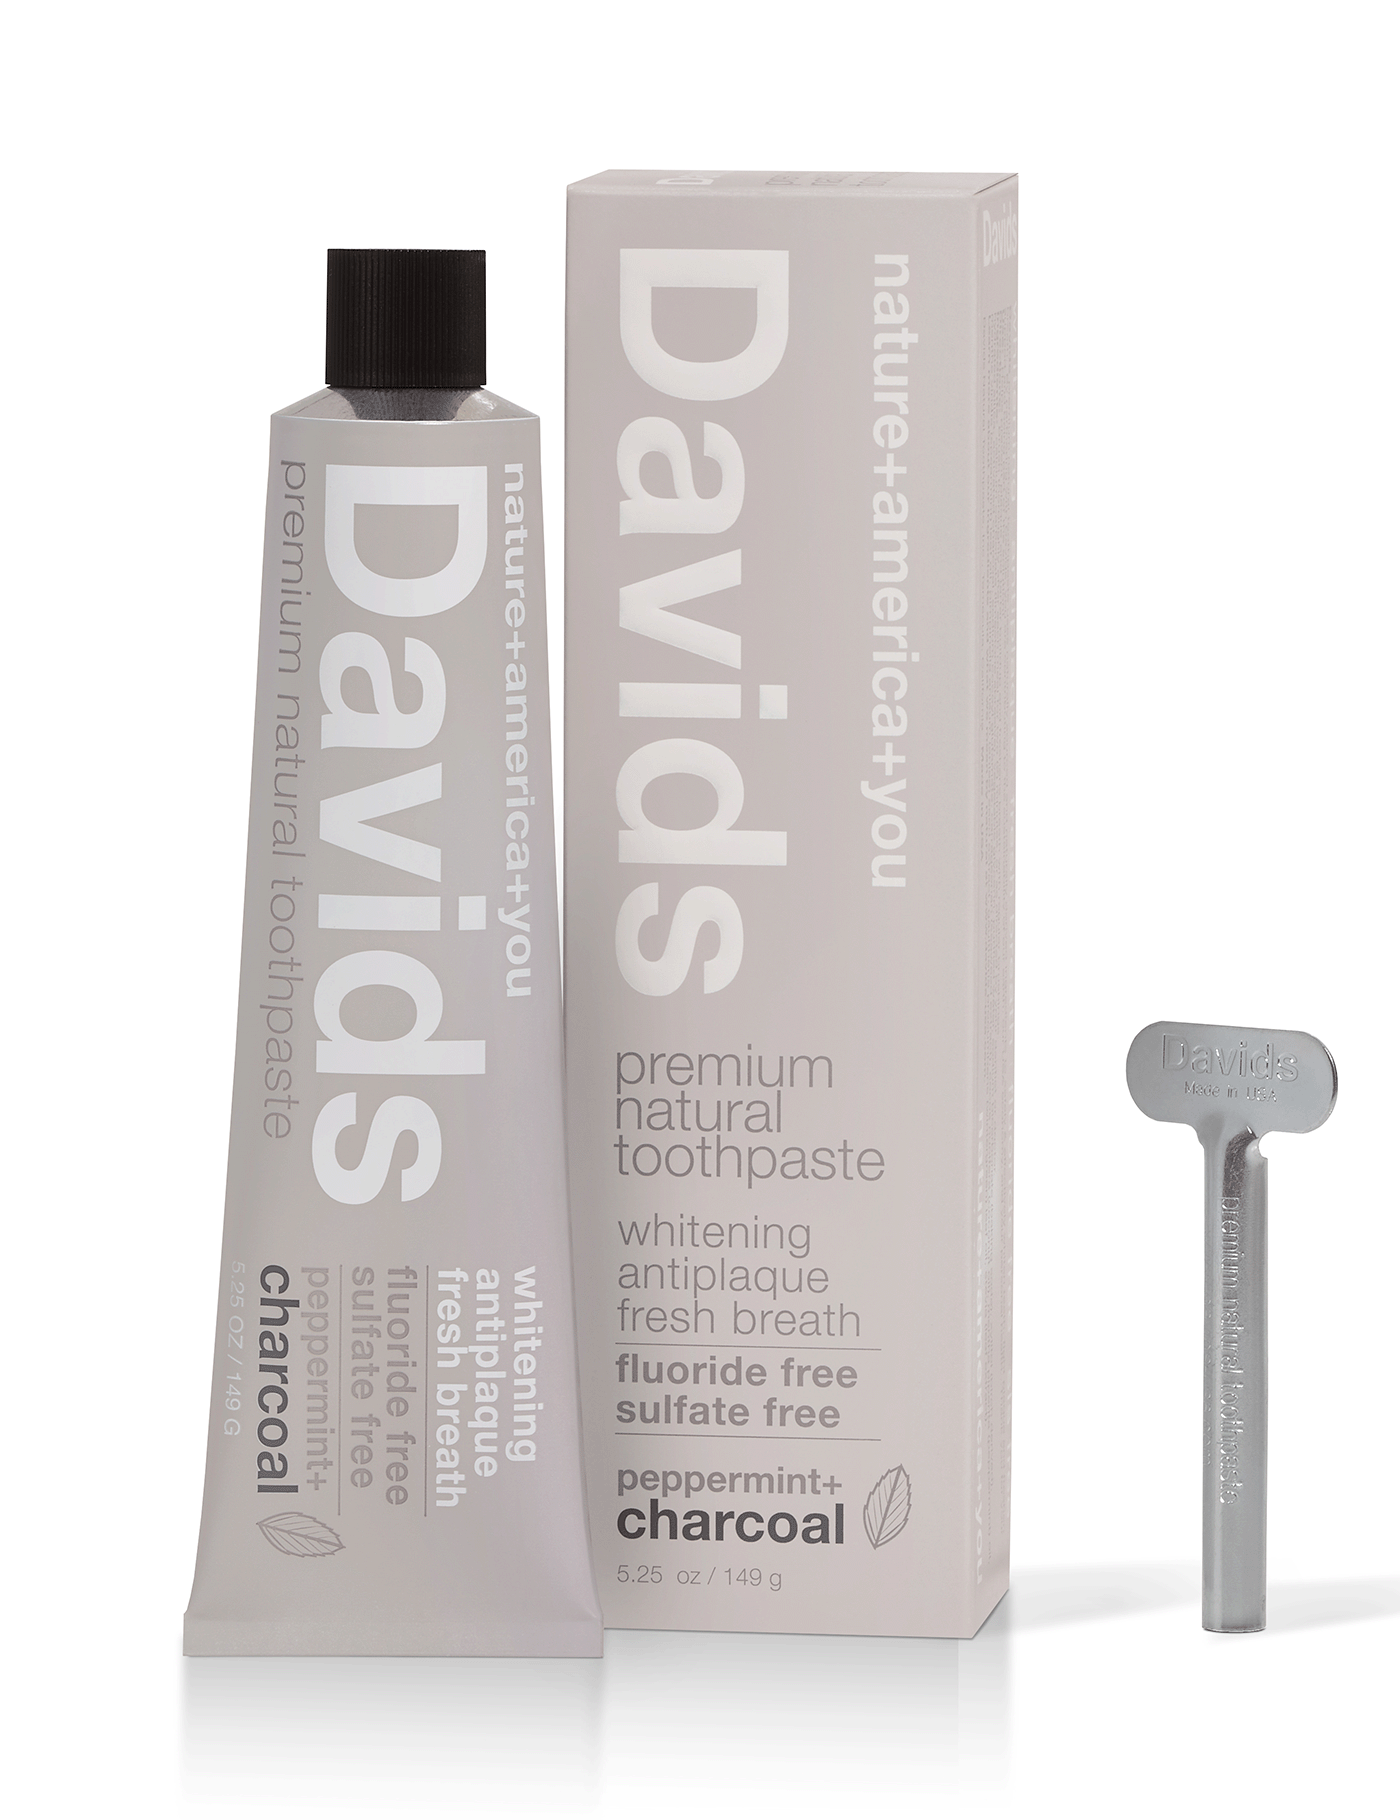 Davids premium toothpaste  /  charcoal+peppermint